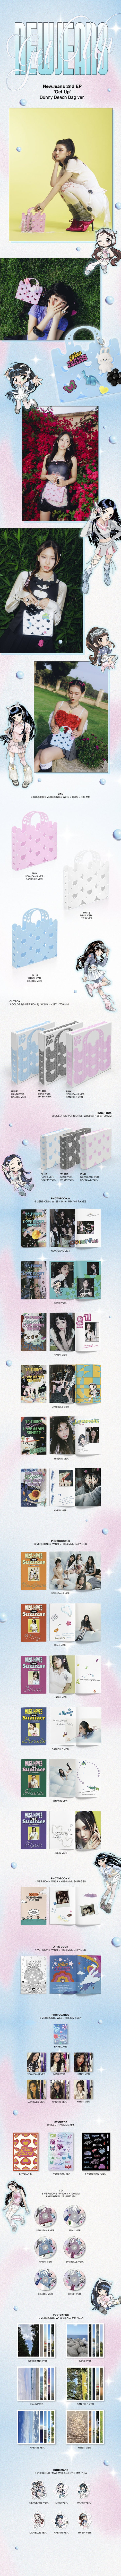 1 CD
1 Bag (random out of 3 types)
3 Photo Books (84 pages per book)
1 Lyrics Paper (24 pages)
5 Postcards
1 Bookmark
3 St...